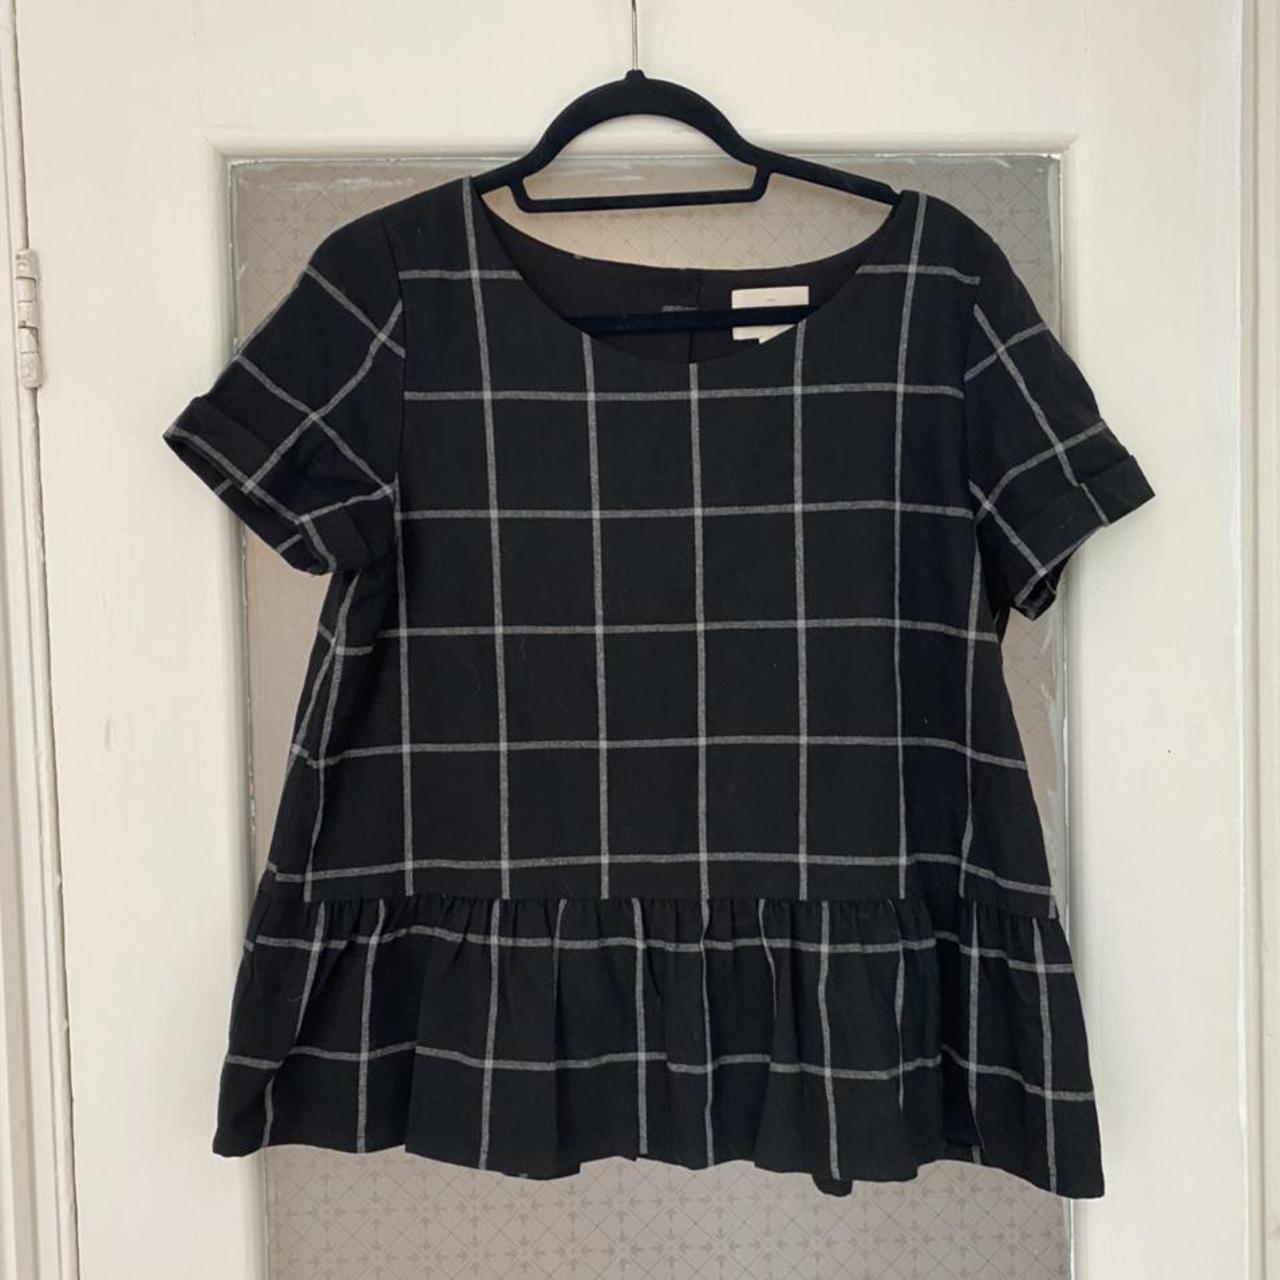 Product Image 1 - Sezane Chequered Top with A